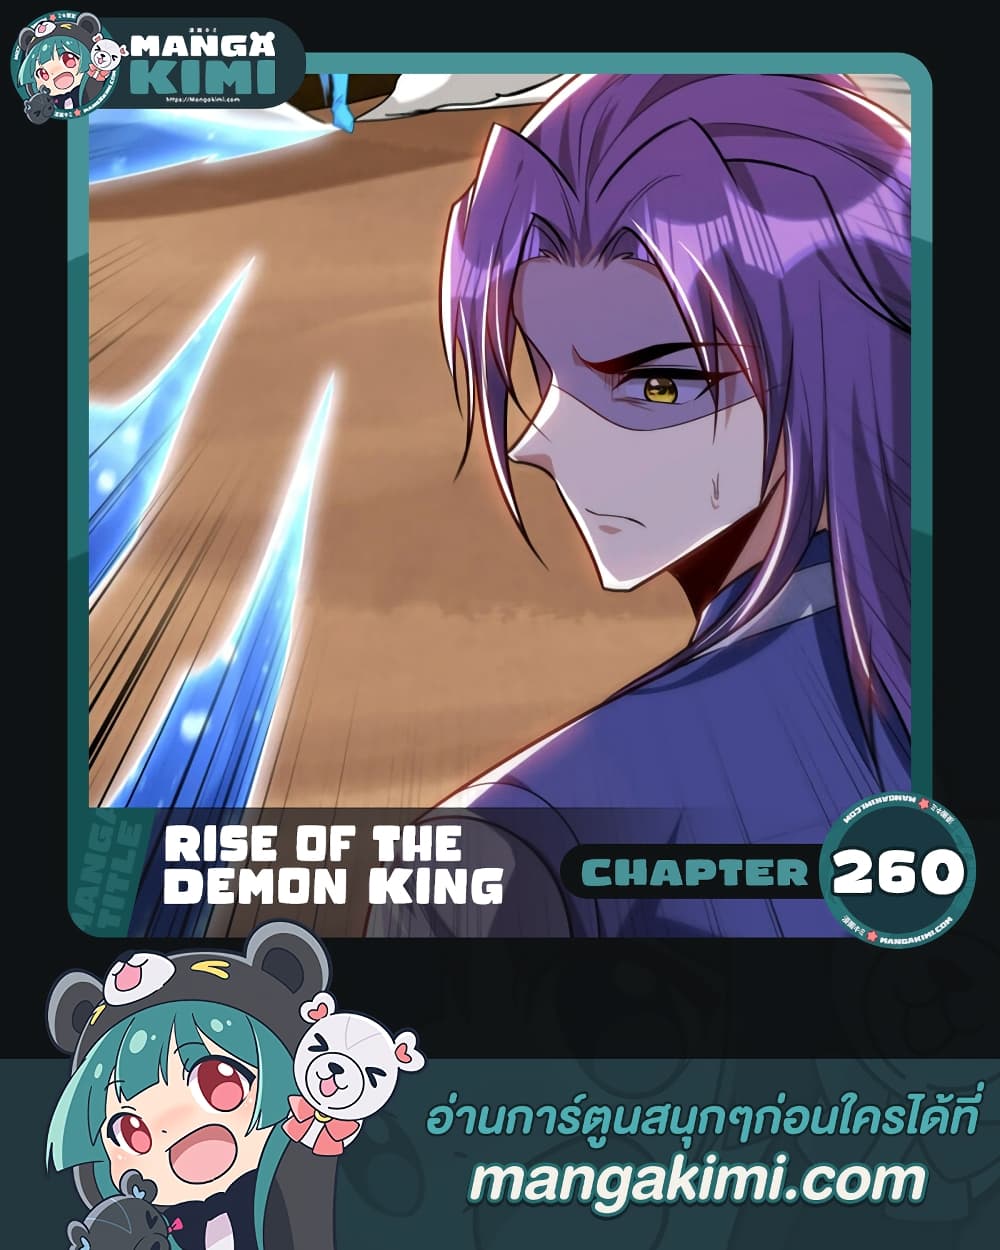 Rise of The Demon King เธฃเธธเนเธเธญเธฃเธธเธ“เนเธซเนเธเธฃเธฒเธเธฒเธเธตเธจเธฒเธ เธ•เธญเธเธ—เธตเน 260 (1)